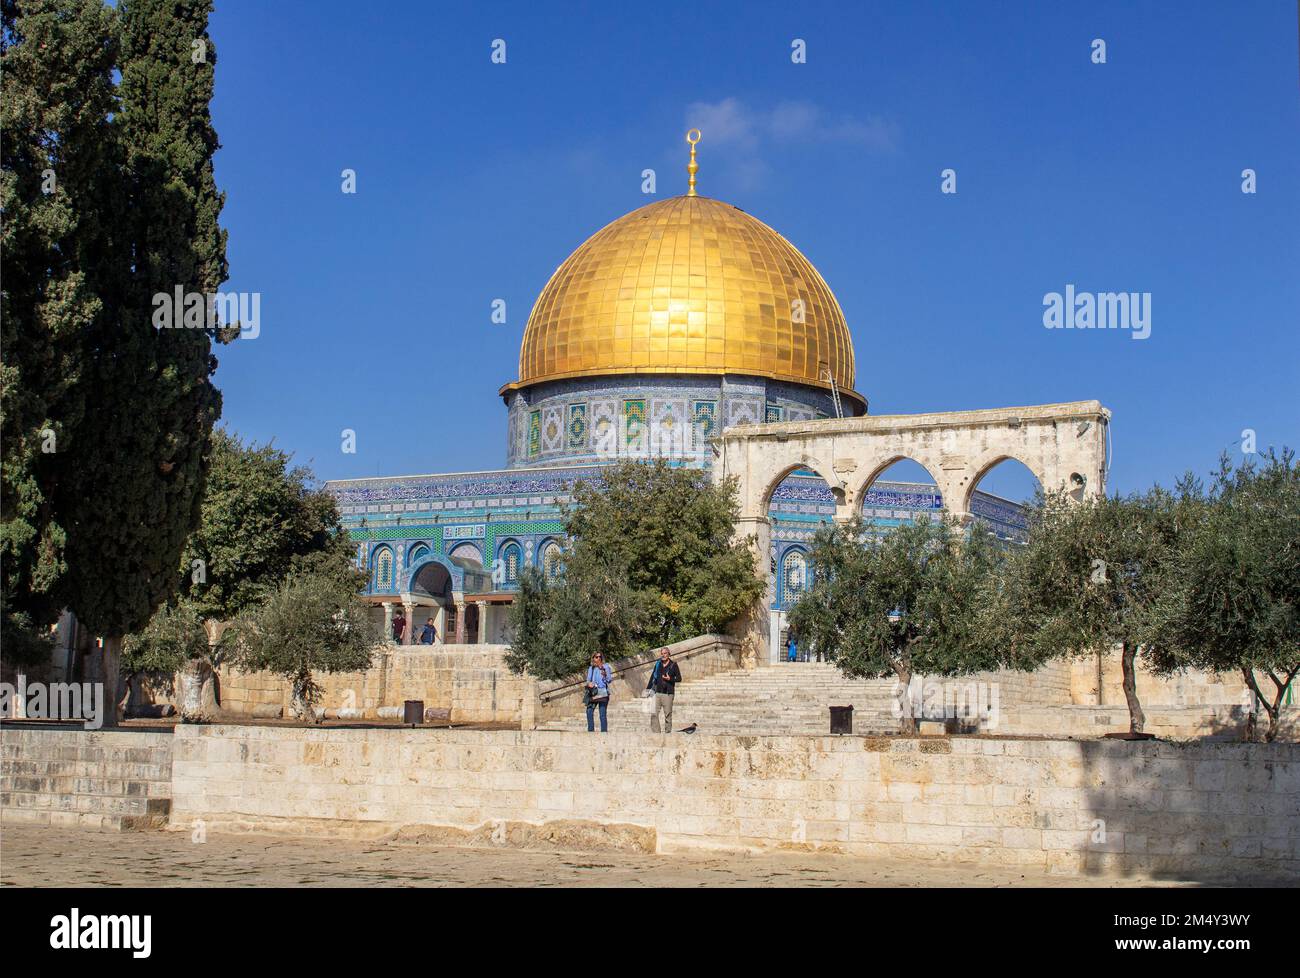 10 Nov 2022 Tourists on the steps at the ancient Dome of the Rock Islamic Holy Place. Built on the site of the ancient Jewish Biblical Solomon's Templ Stock Photo